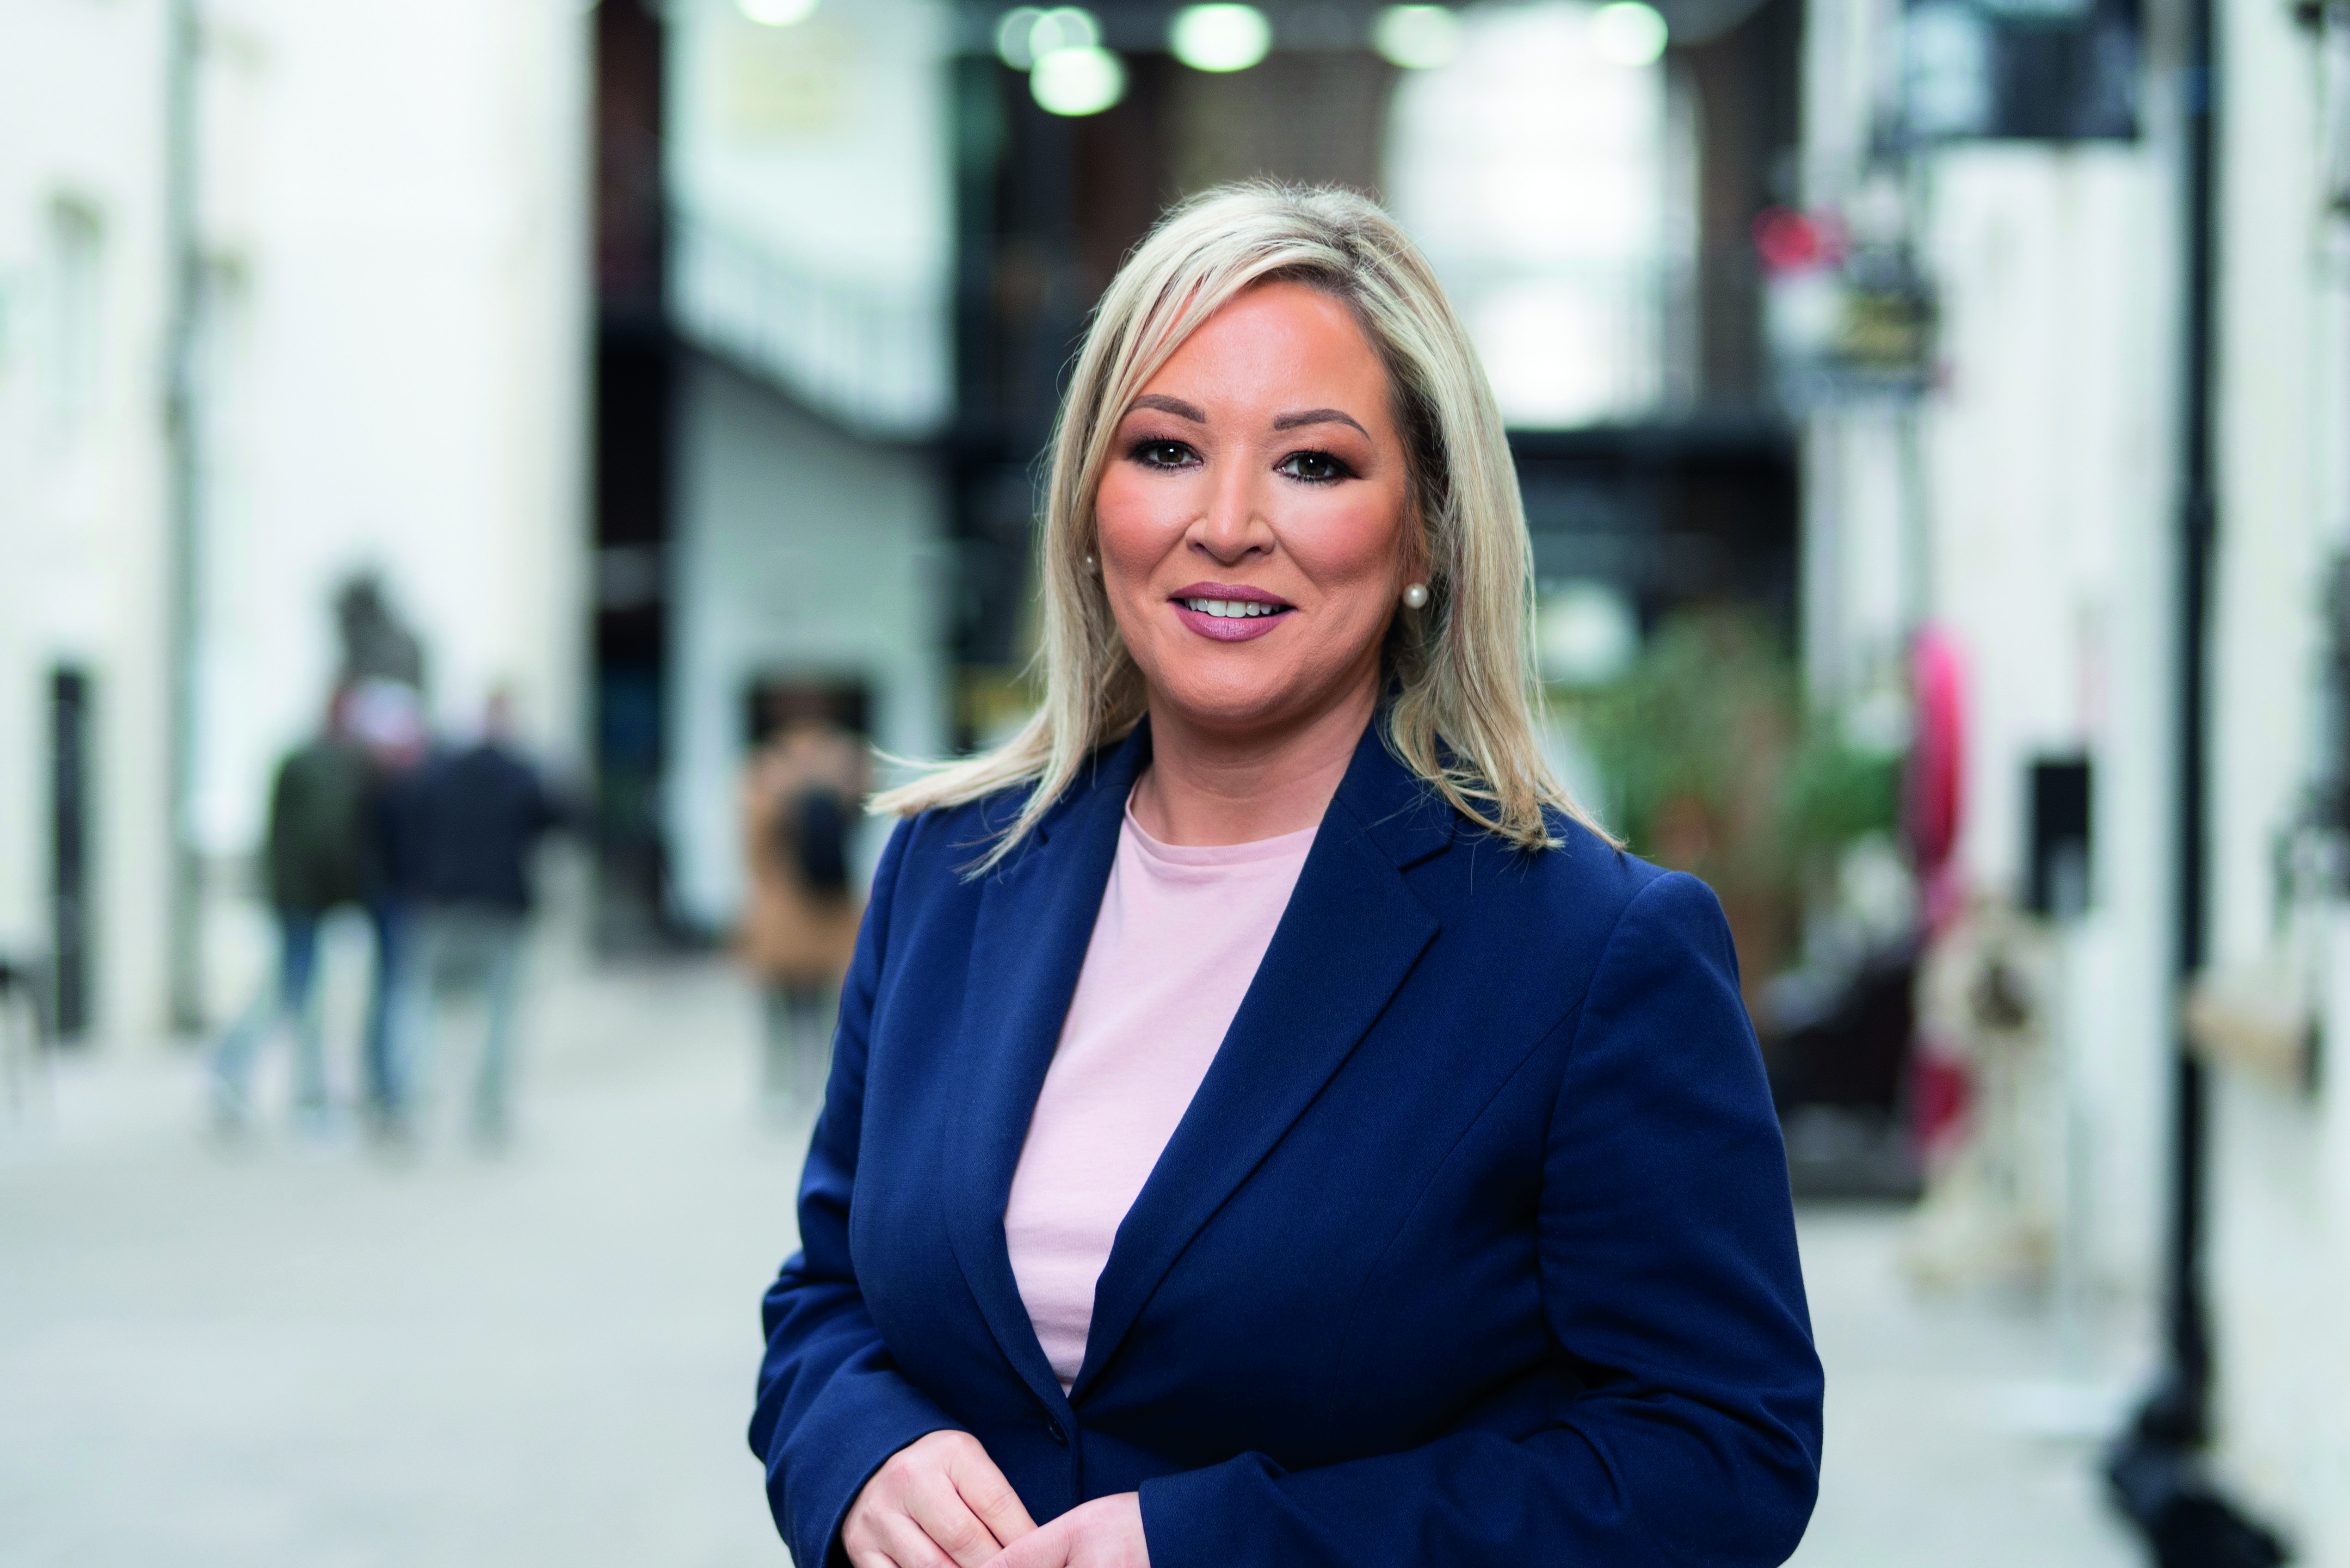 Northern Ireland’s First Minister-elect Michelle O’Neill will discuss U.S.-Irish relations and the prospects for forming a new government.